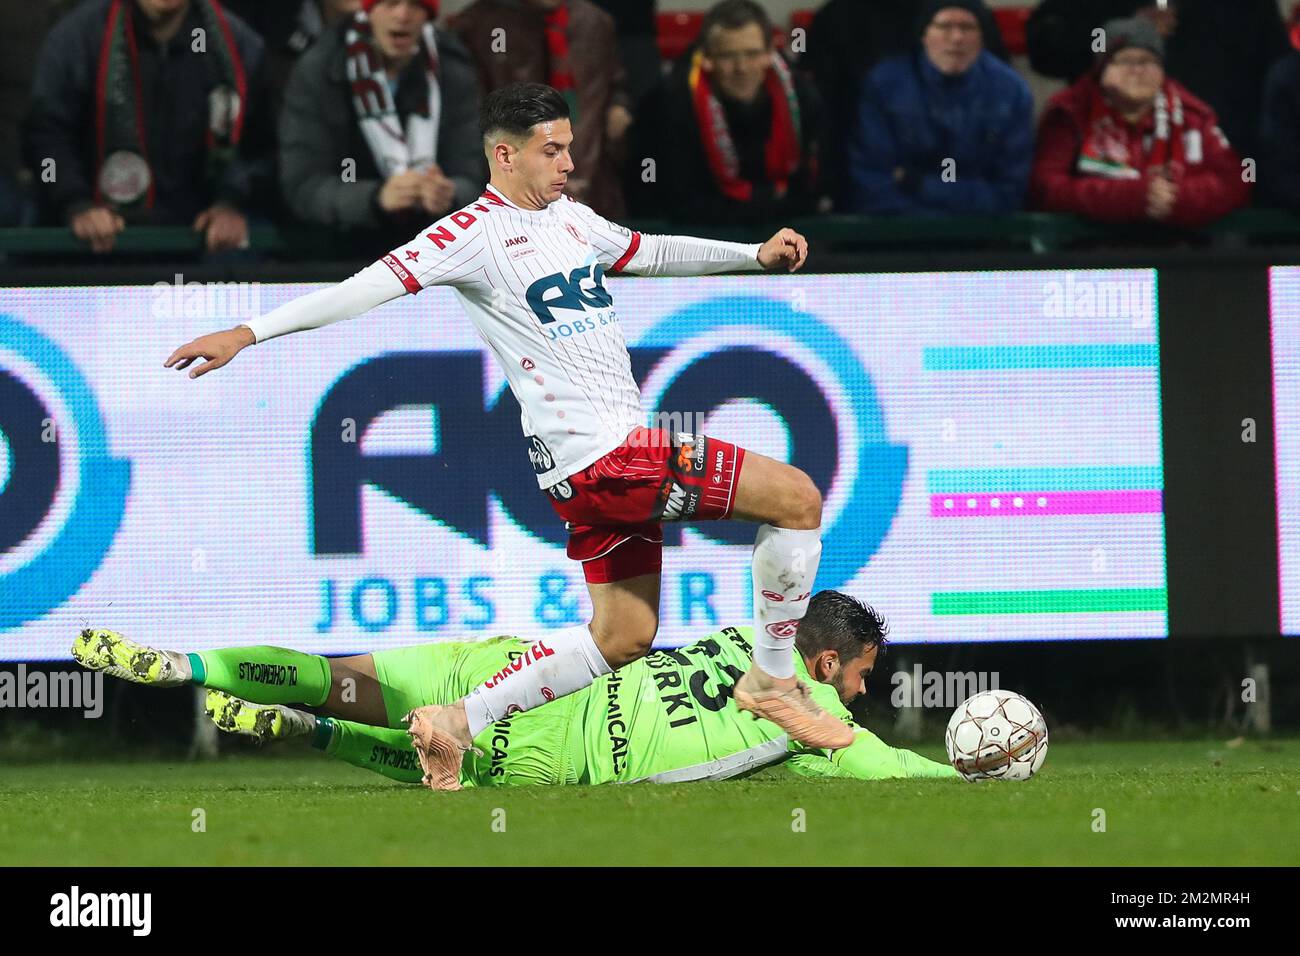 Kortrik's Larry Azouni and Essevee's Marco Burki fight for the ball during a soccer game between KV Kortrijk and Zulte Waregem, Tuesday 04 December 2018 in Kortrijk, in the 1/8th final of the 'Croky Cup' Belgian cup. BELGA PHOTO BRUNO FAHY Stock Photo